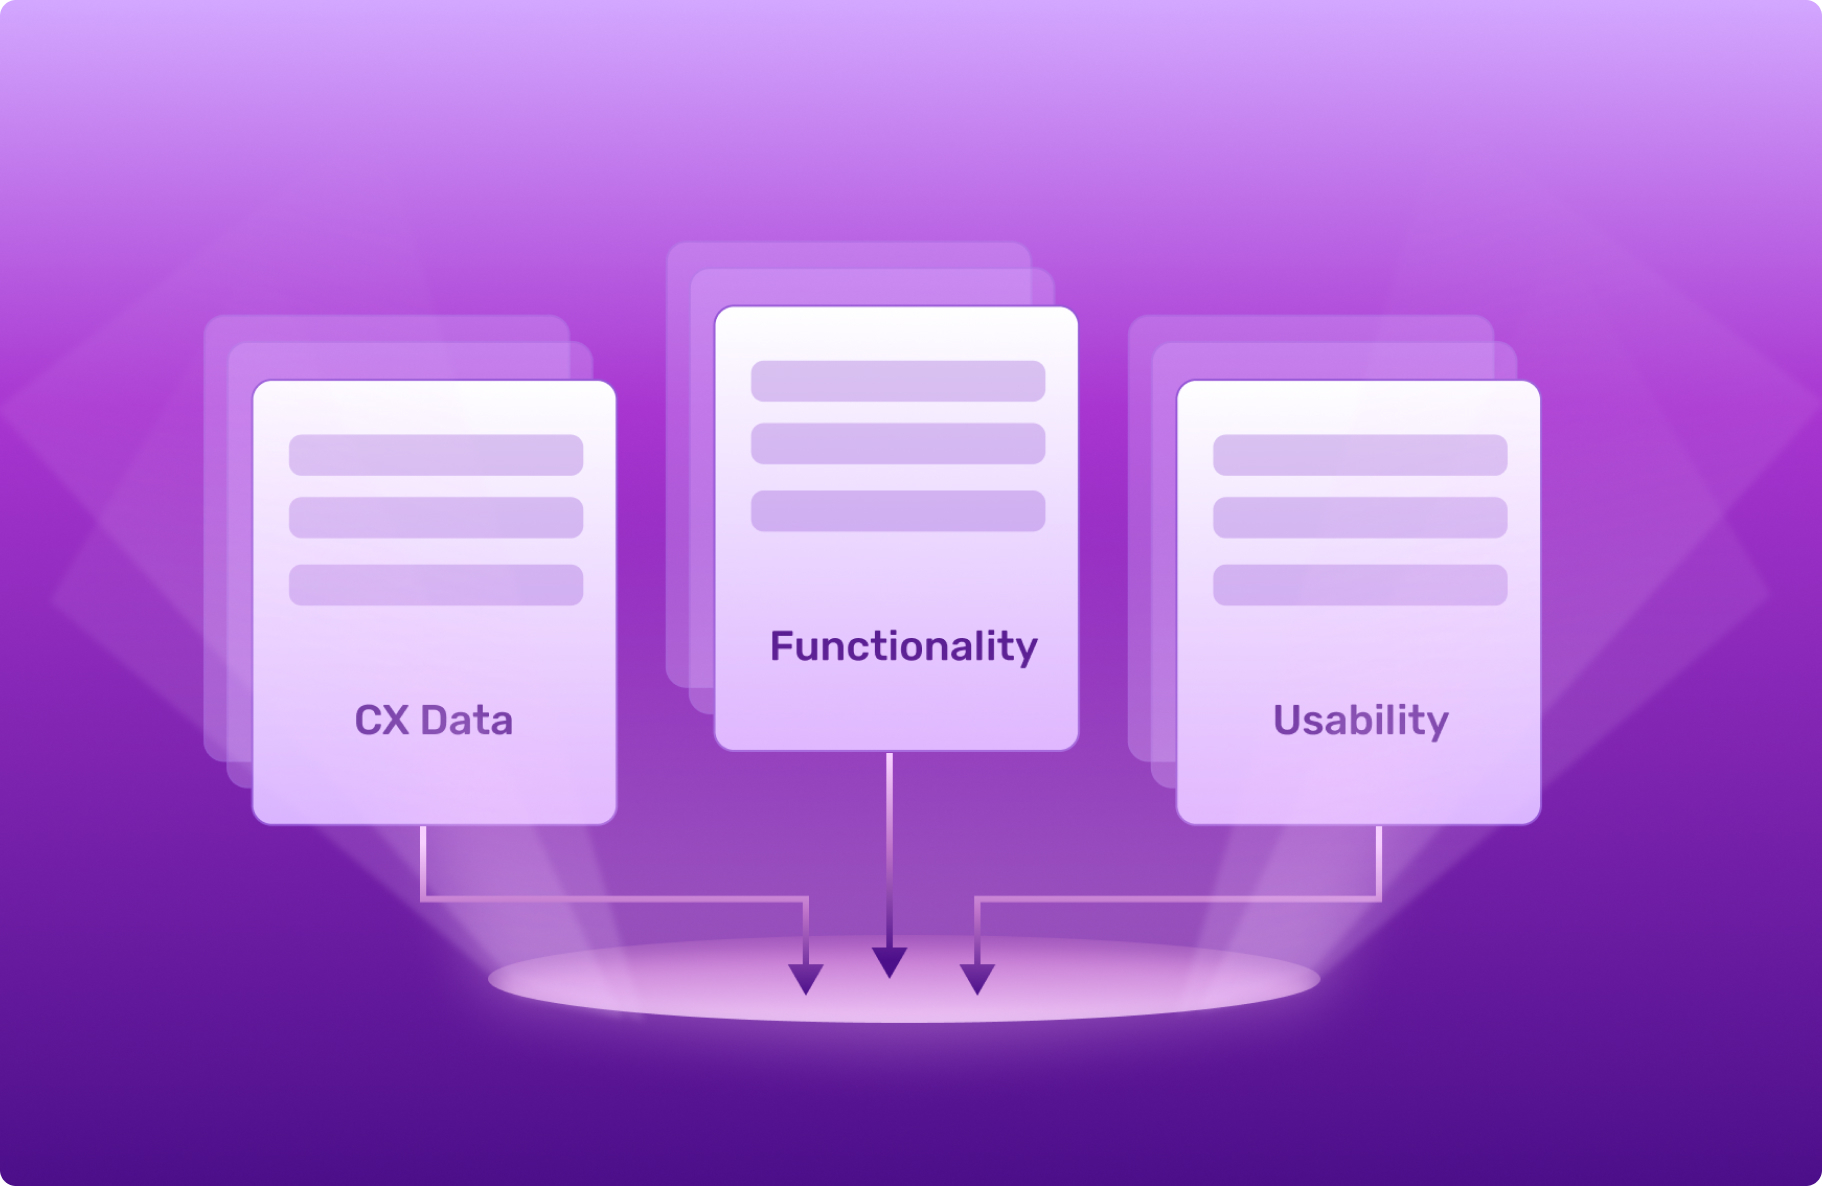 Topic Modeling in AI; What is It And How Does It Help CX Teams?